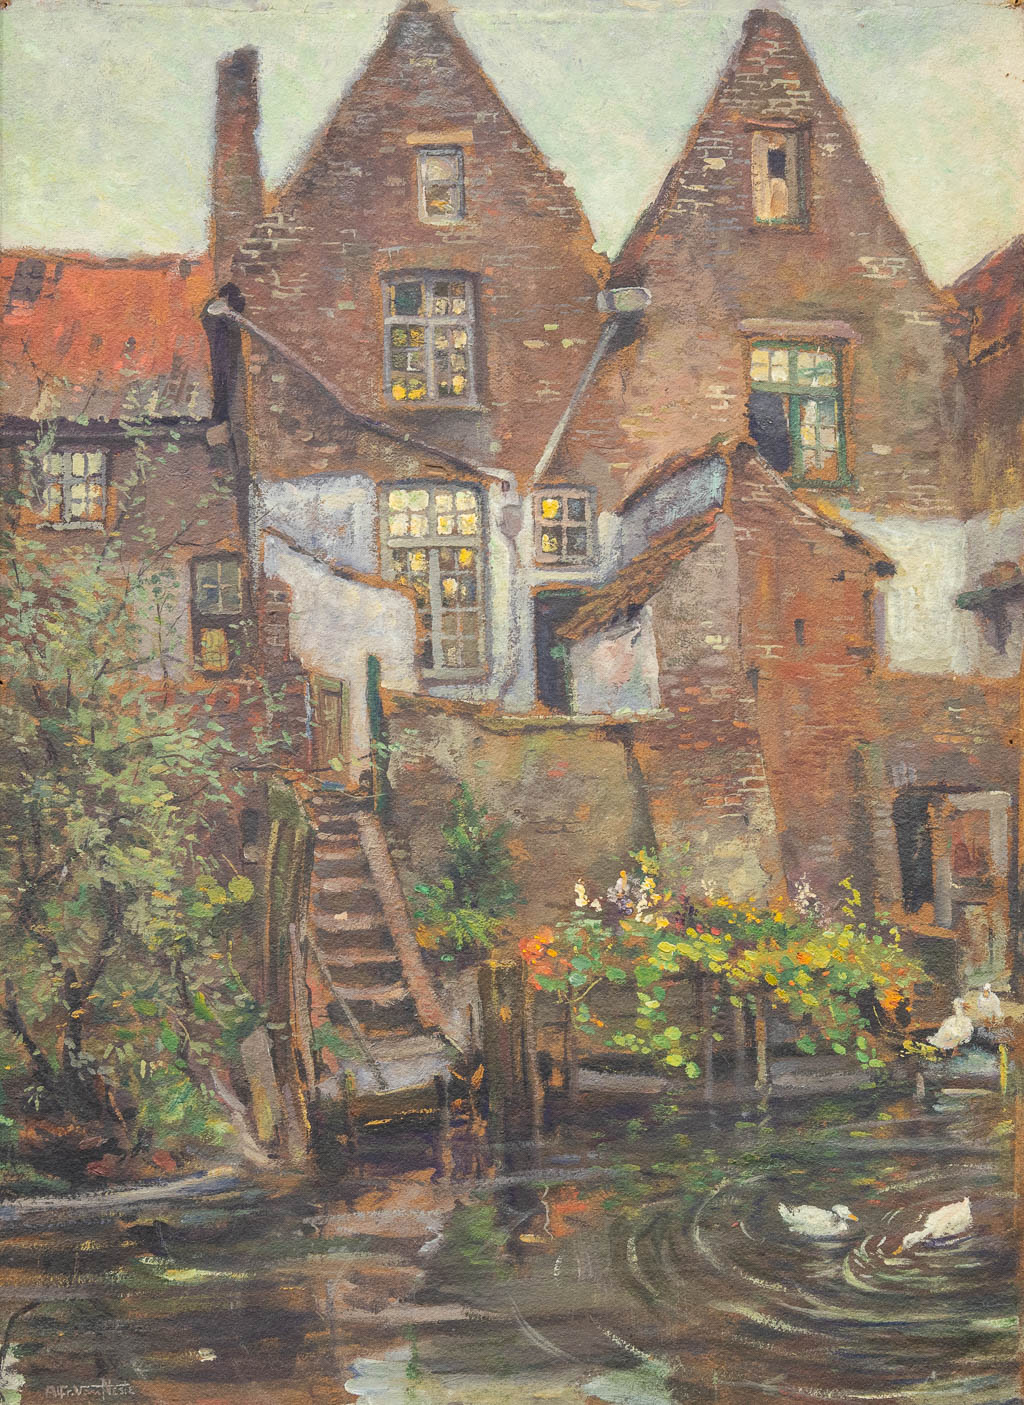 Alfred VAN NESTE (1874-1969) 'A view of Bruges' a painting, oil on panel. (50 x 70 cm)